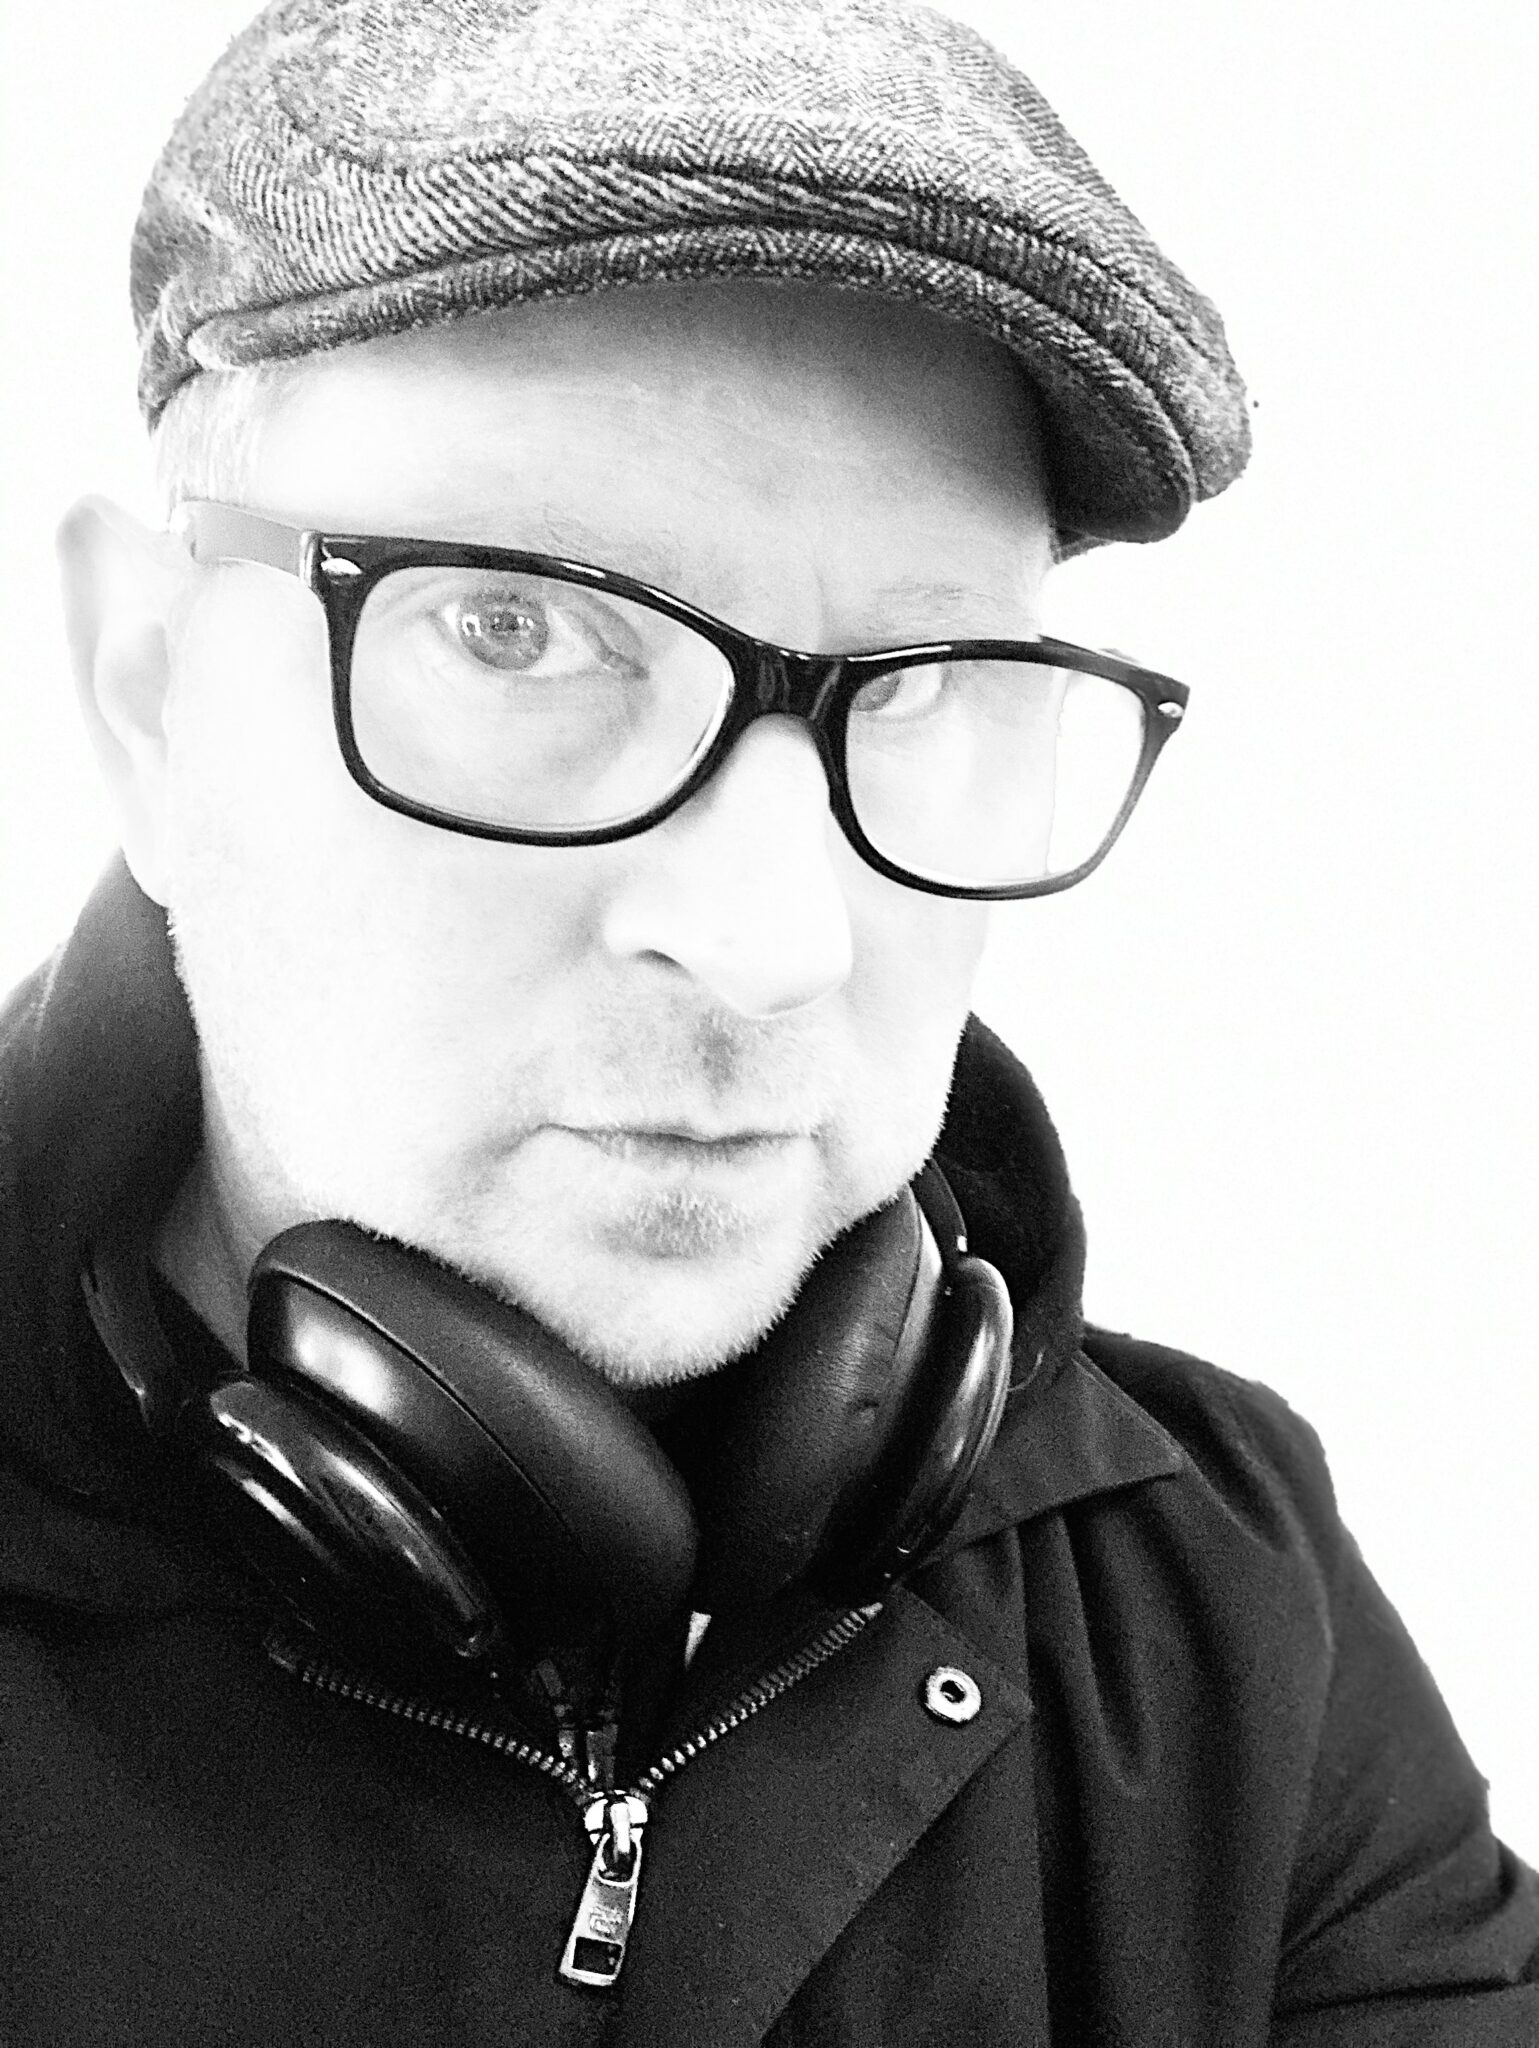 Headshot of Isaac Toast in a raincoat and newsboy cap wearing headphones around his neck and eyeglasses.